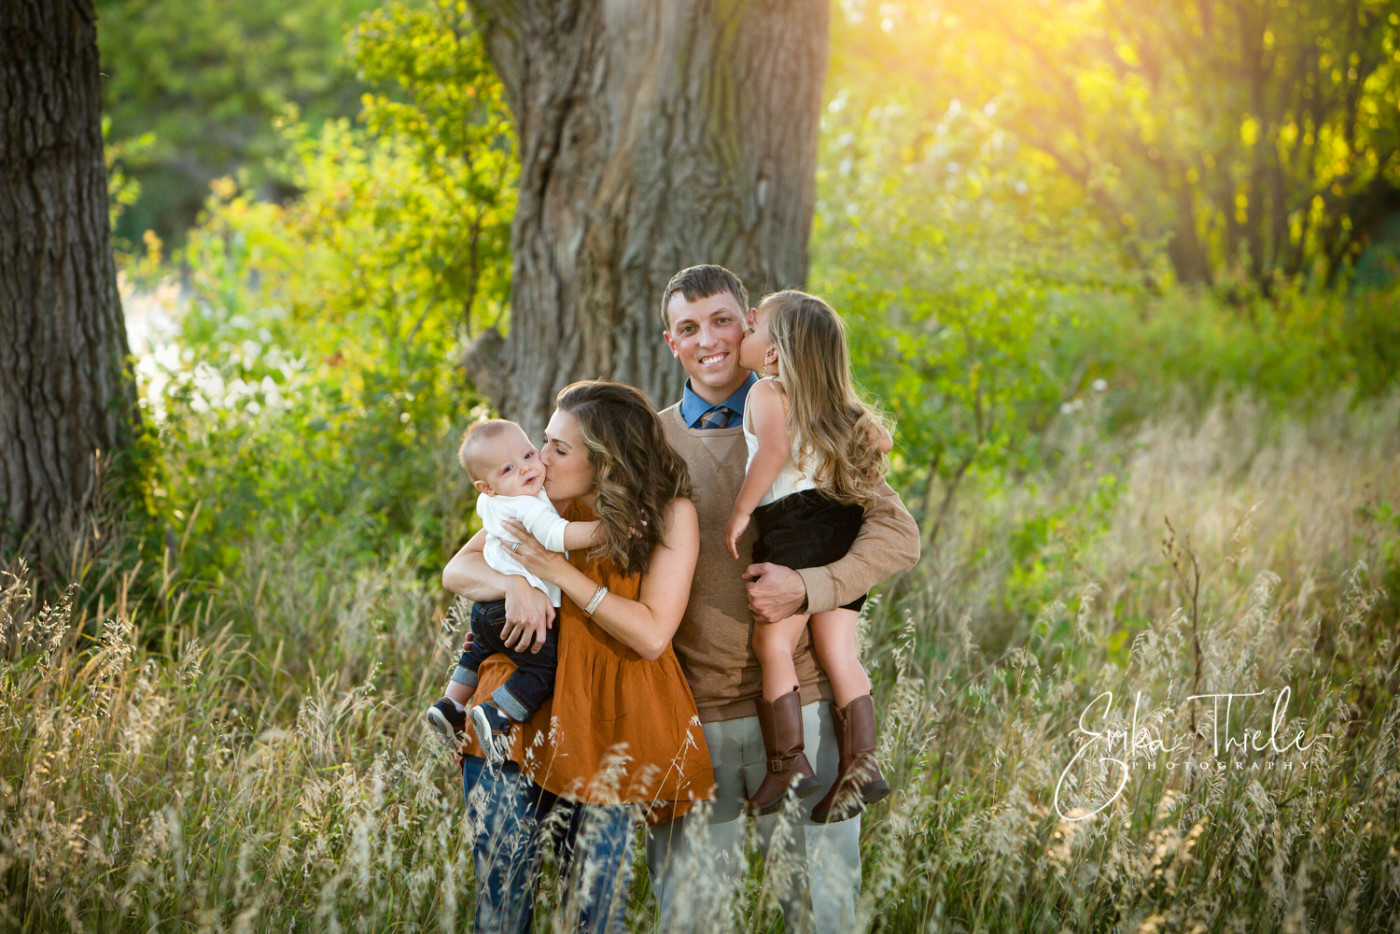 The Vancura Family  |  An Outdoor Family Session 